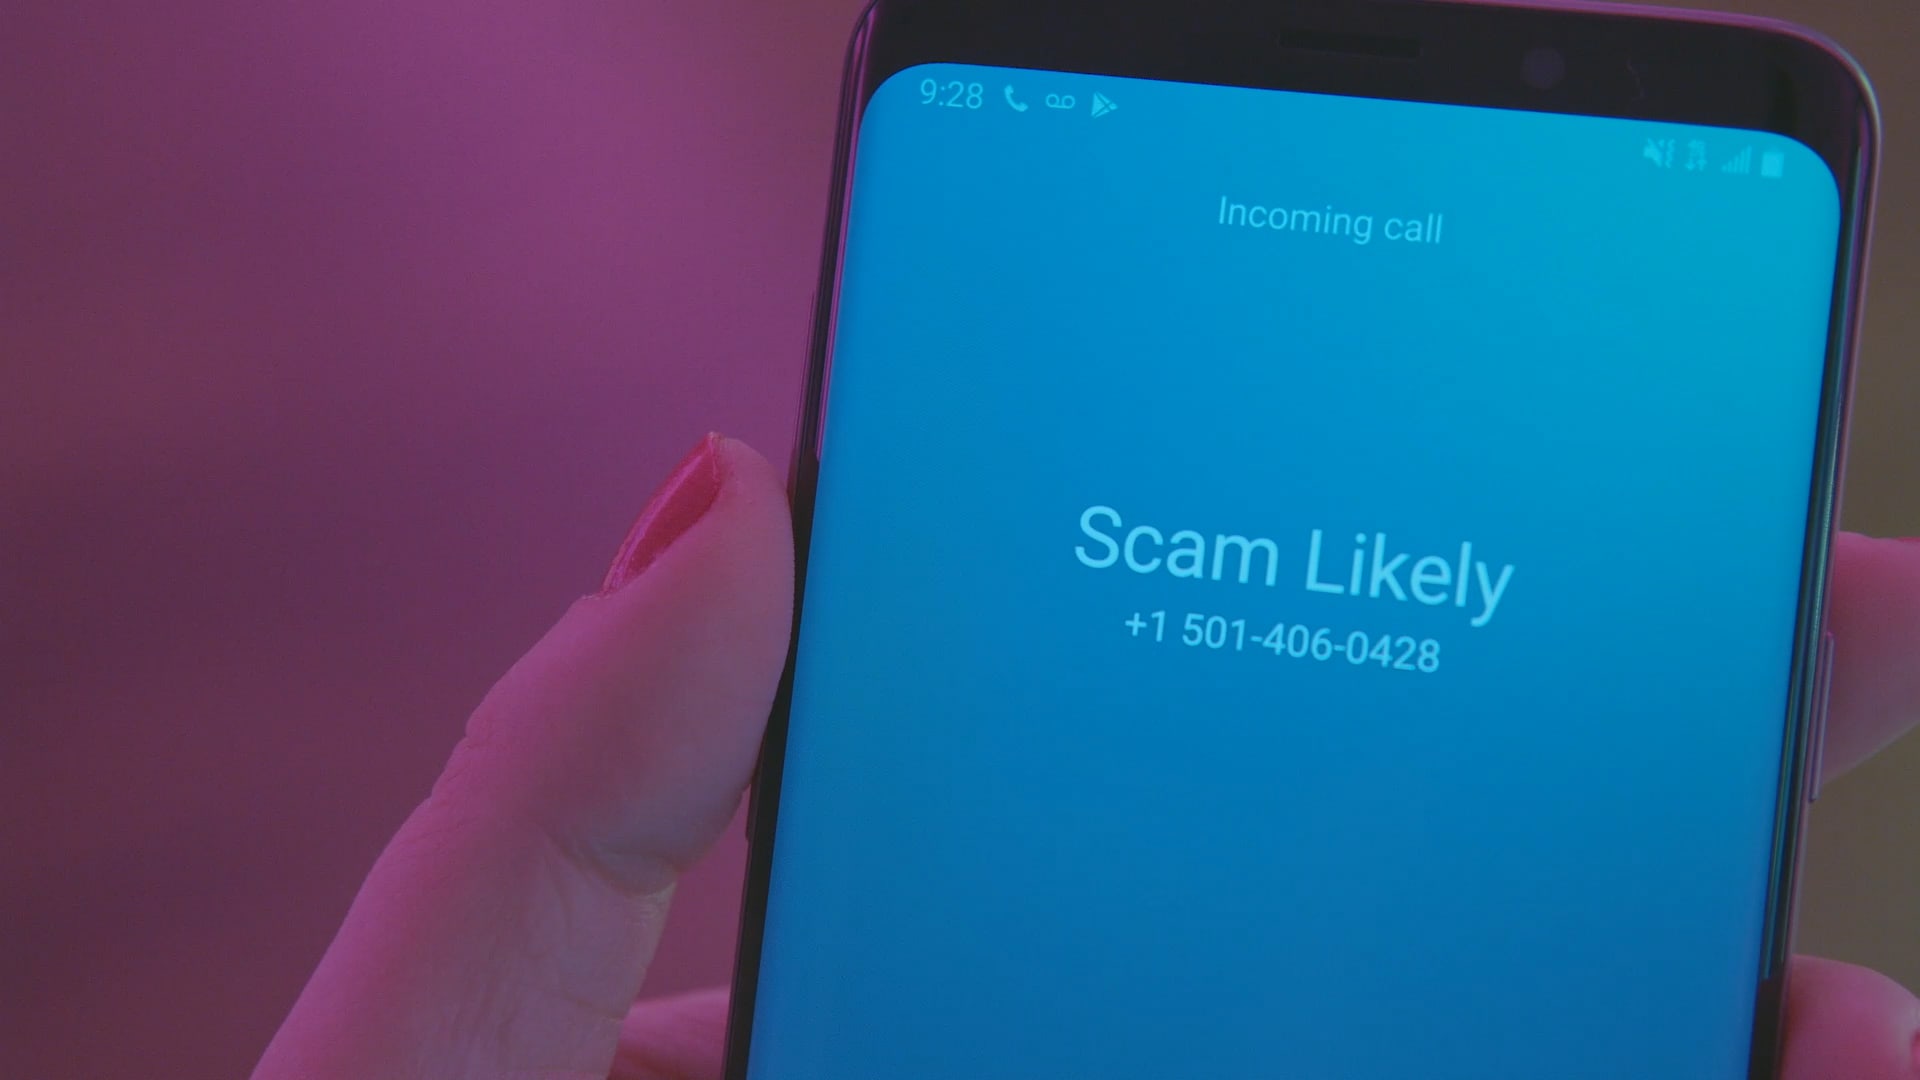 An incoming call is labeled as Scam Likely on a T-Mobile phone